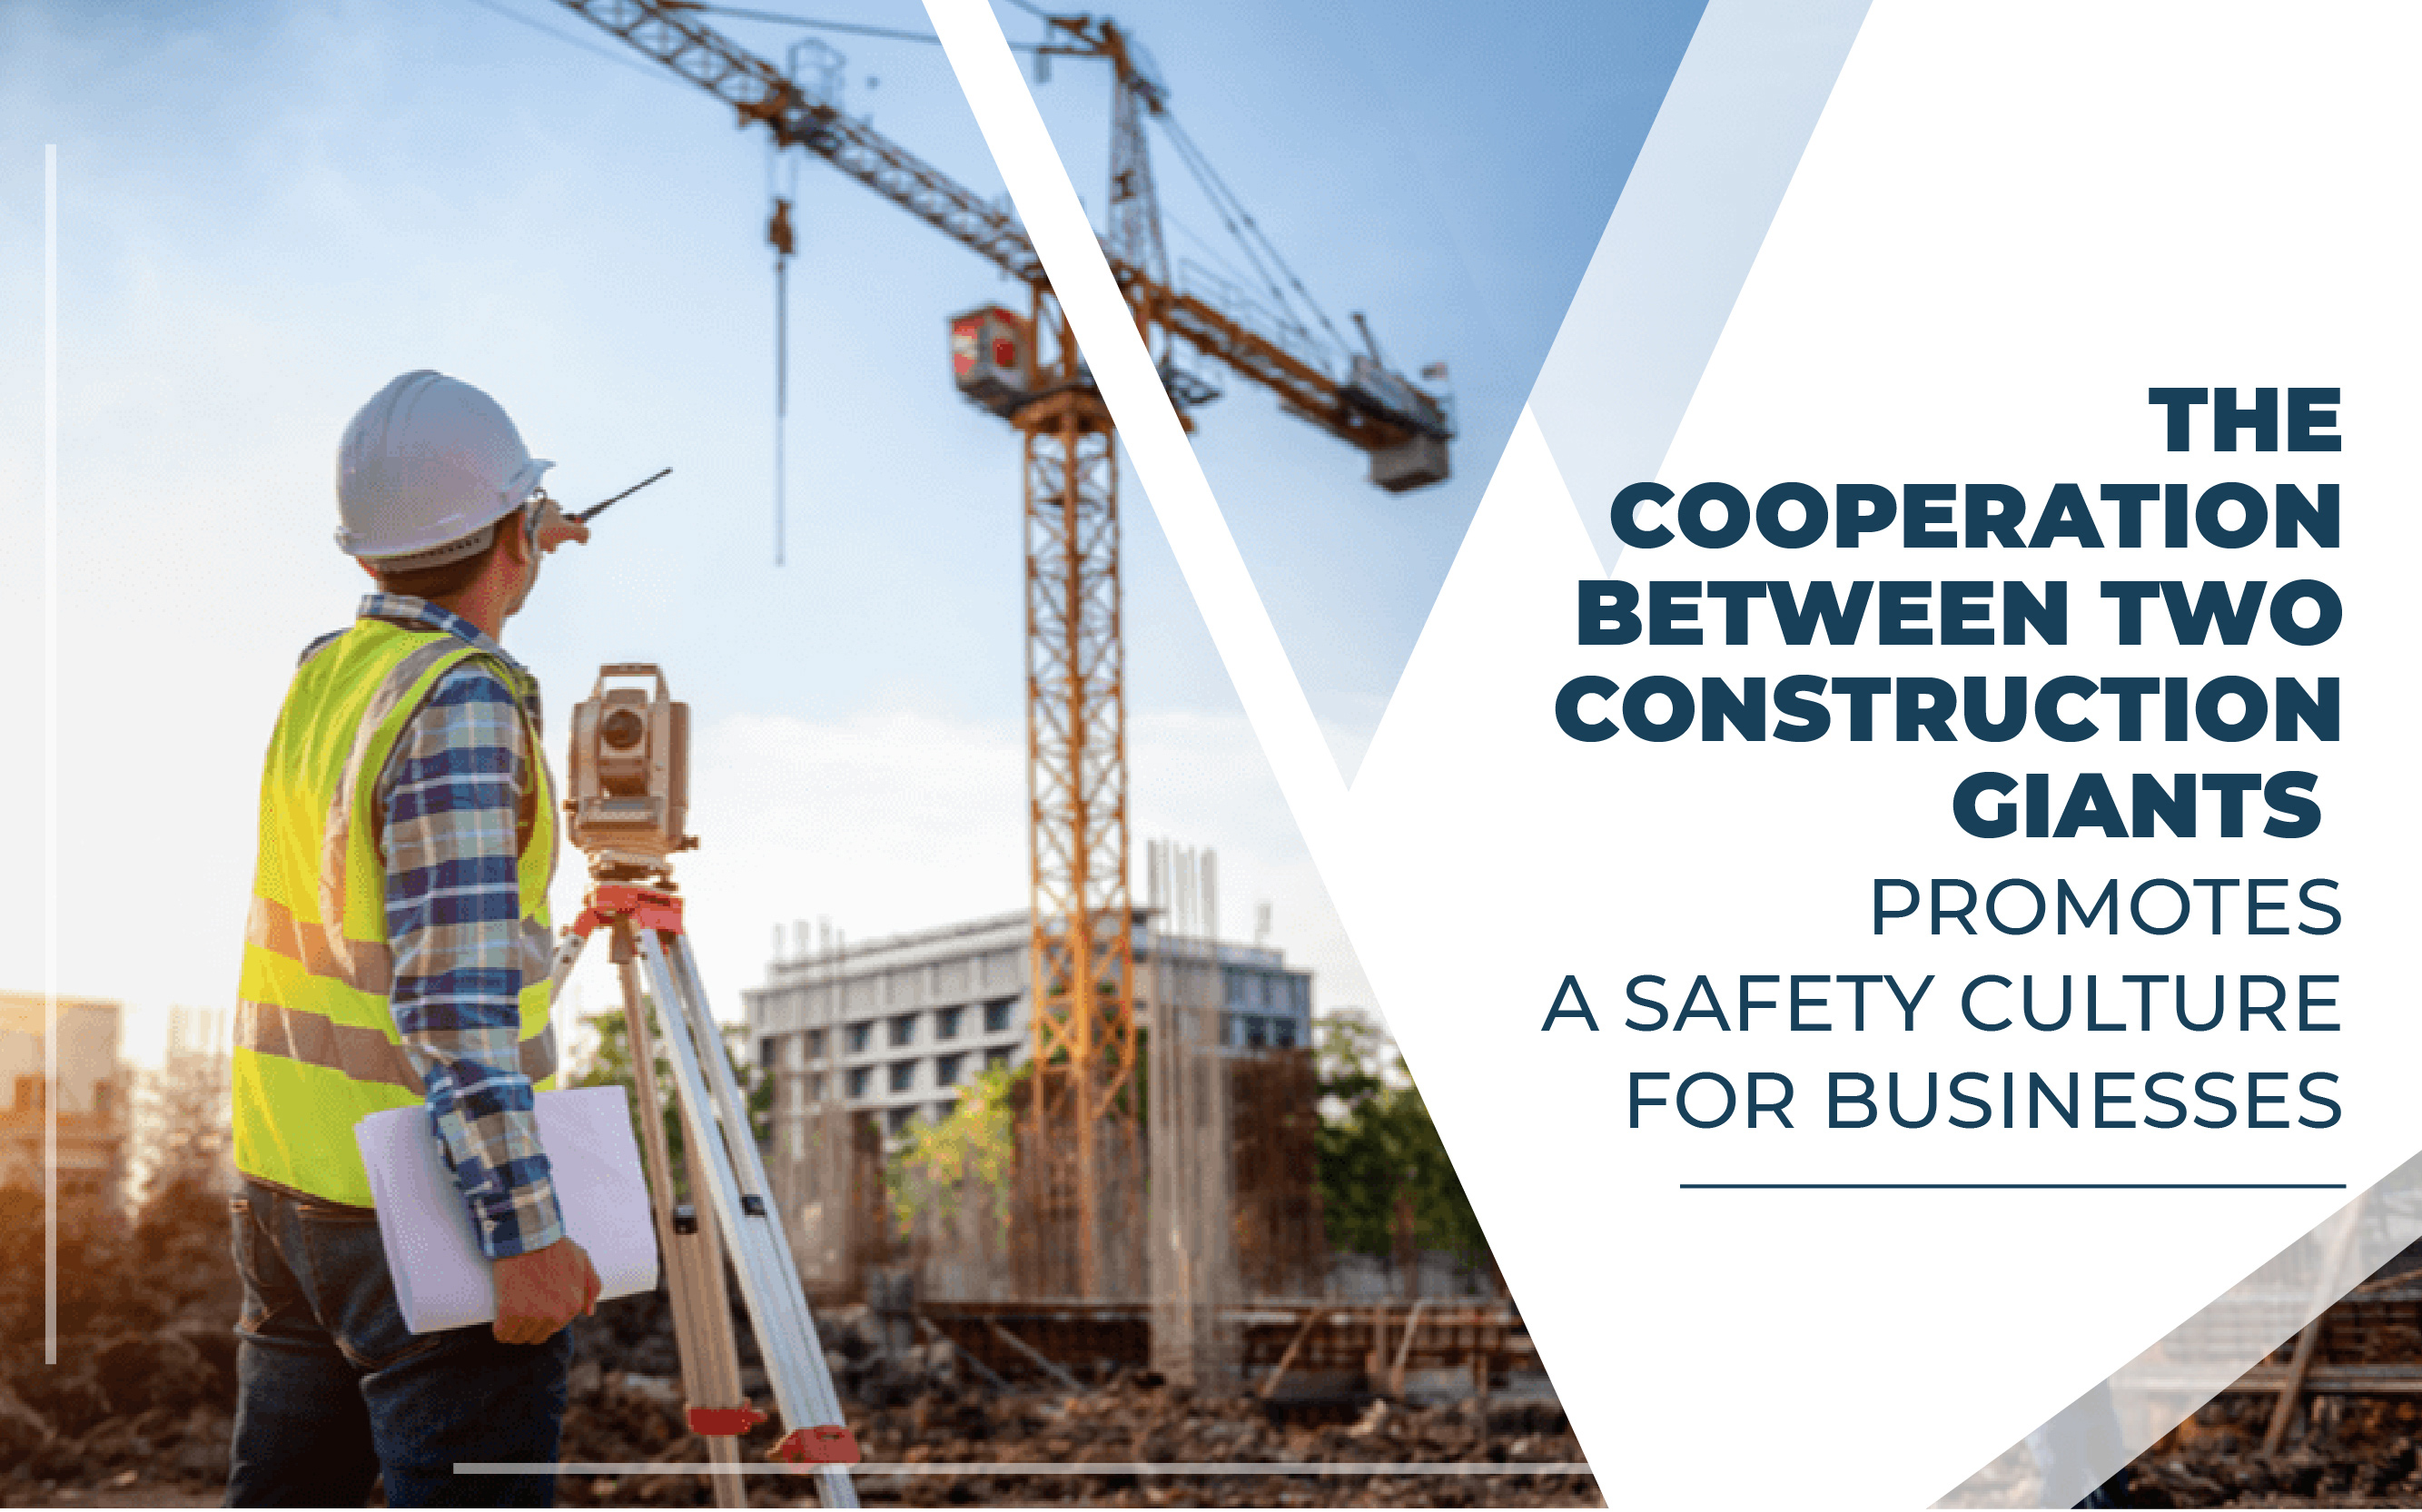 THE COOPERATION BETWEEN TWO CONSTRUCTION GIANTS TO PROMOTE A SAFETY CULTURE FOR BUSINESSES